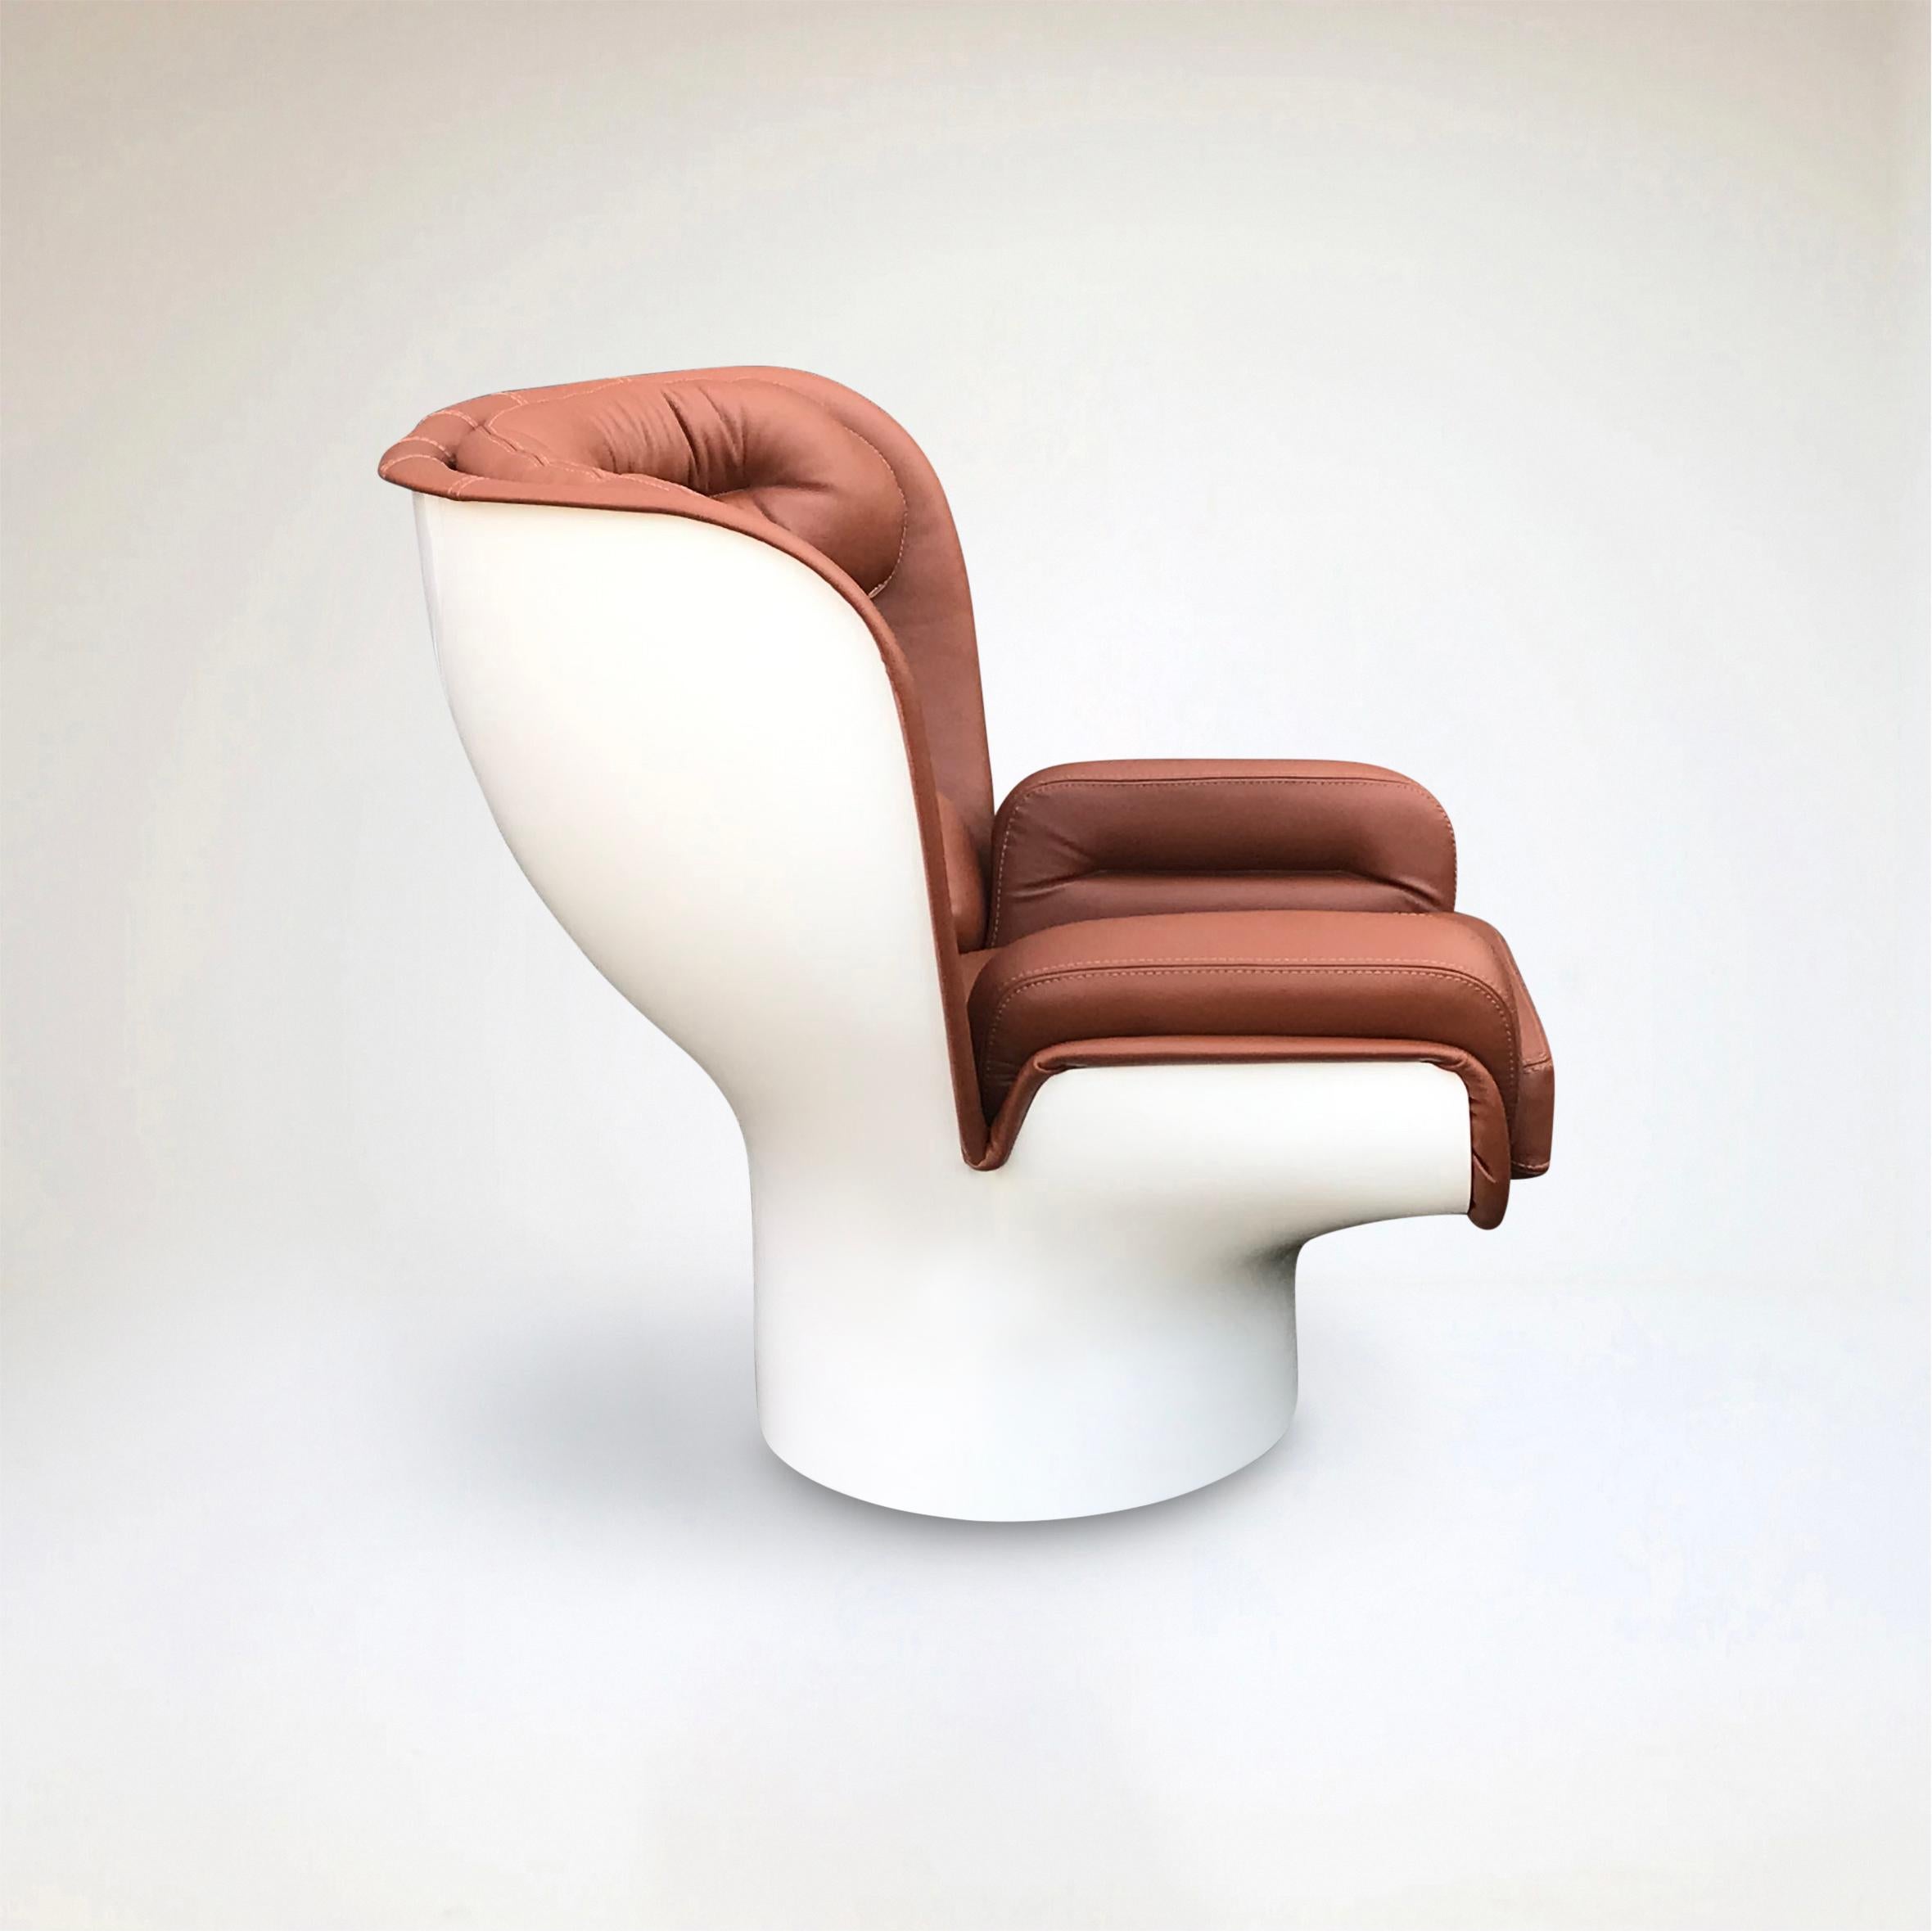 Cognac leather and white Elda chair by Joe Colombo for Longhi Italy For Sale 1